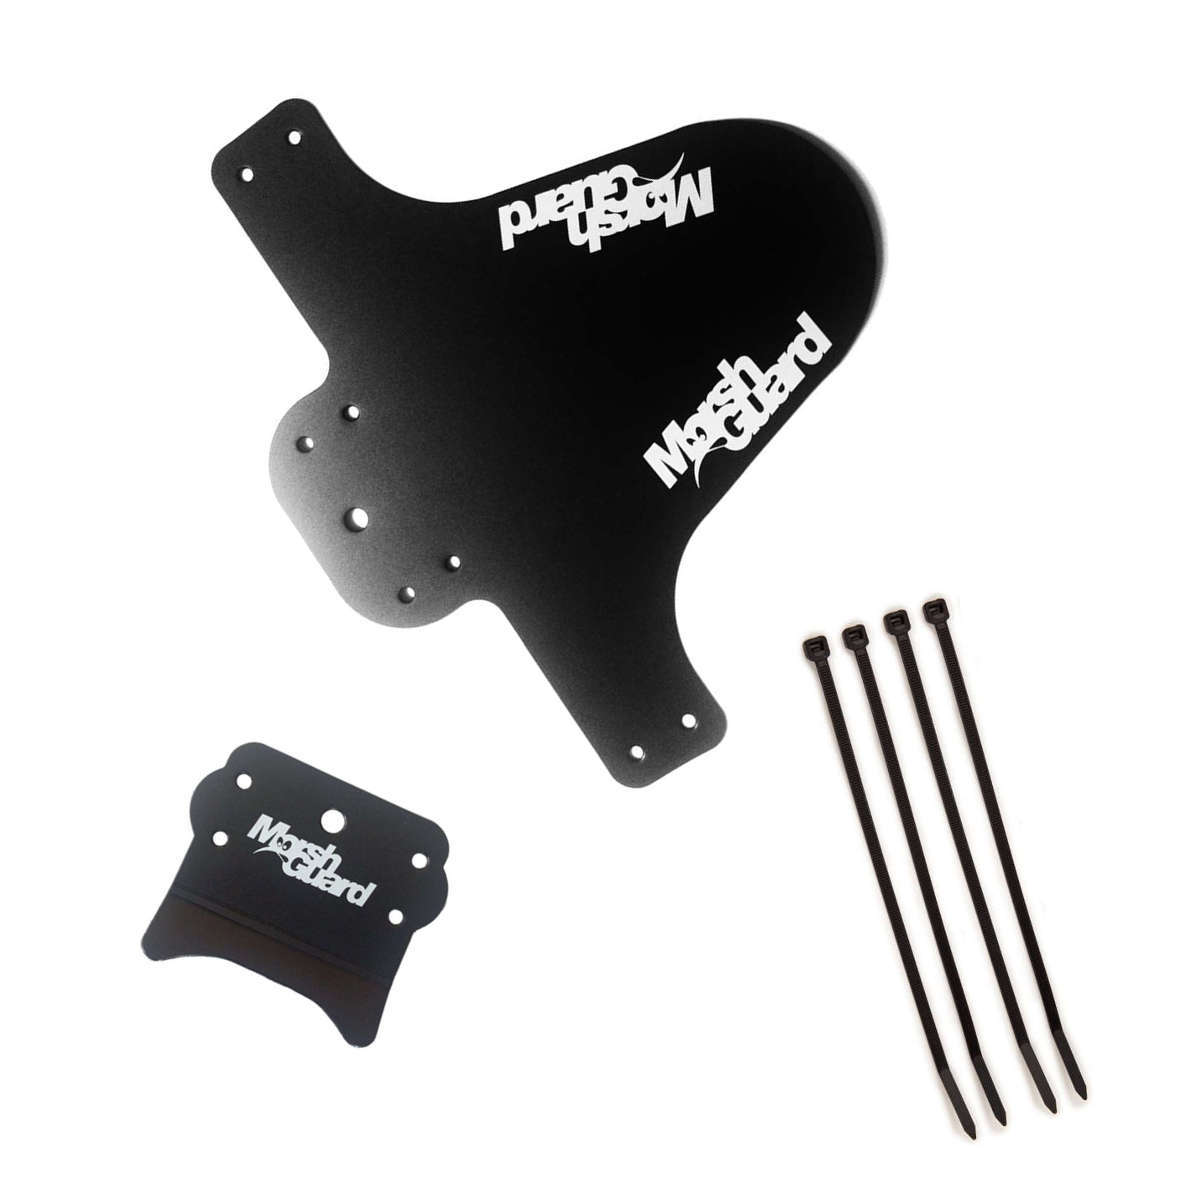 MarshGuard Mudguard Complete Set  Black, with Fender, Stash and Cable Ties